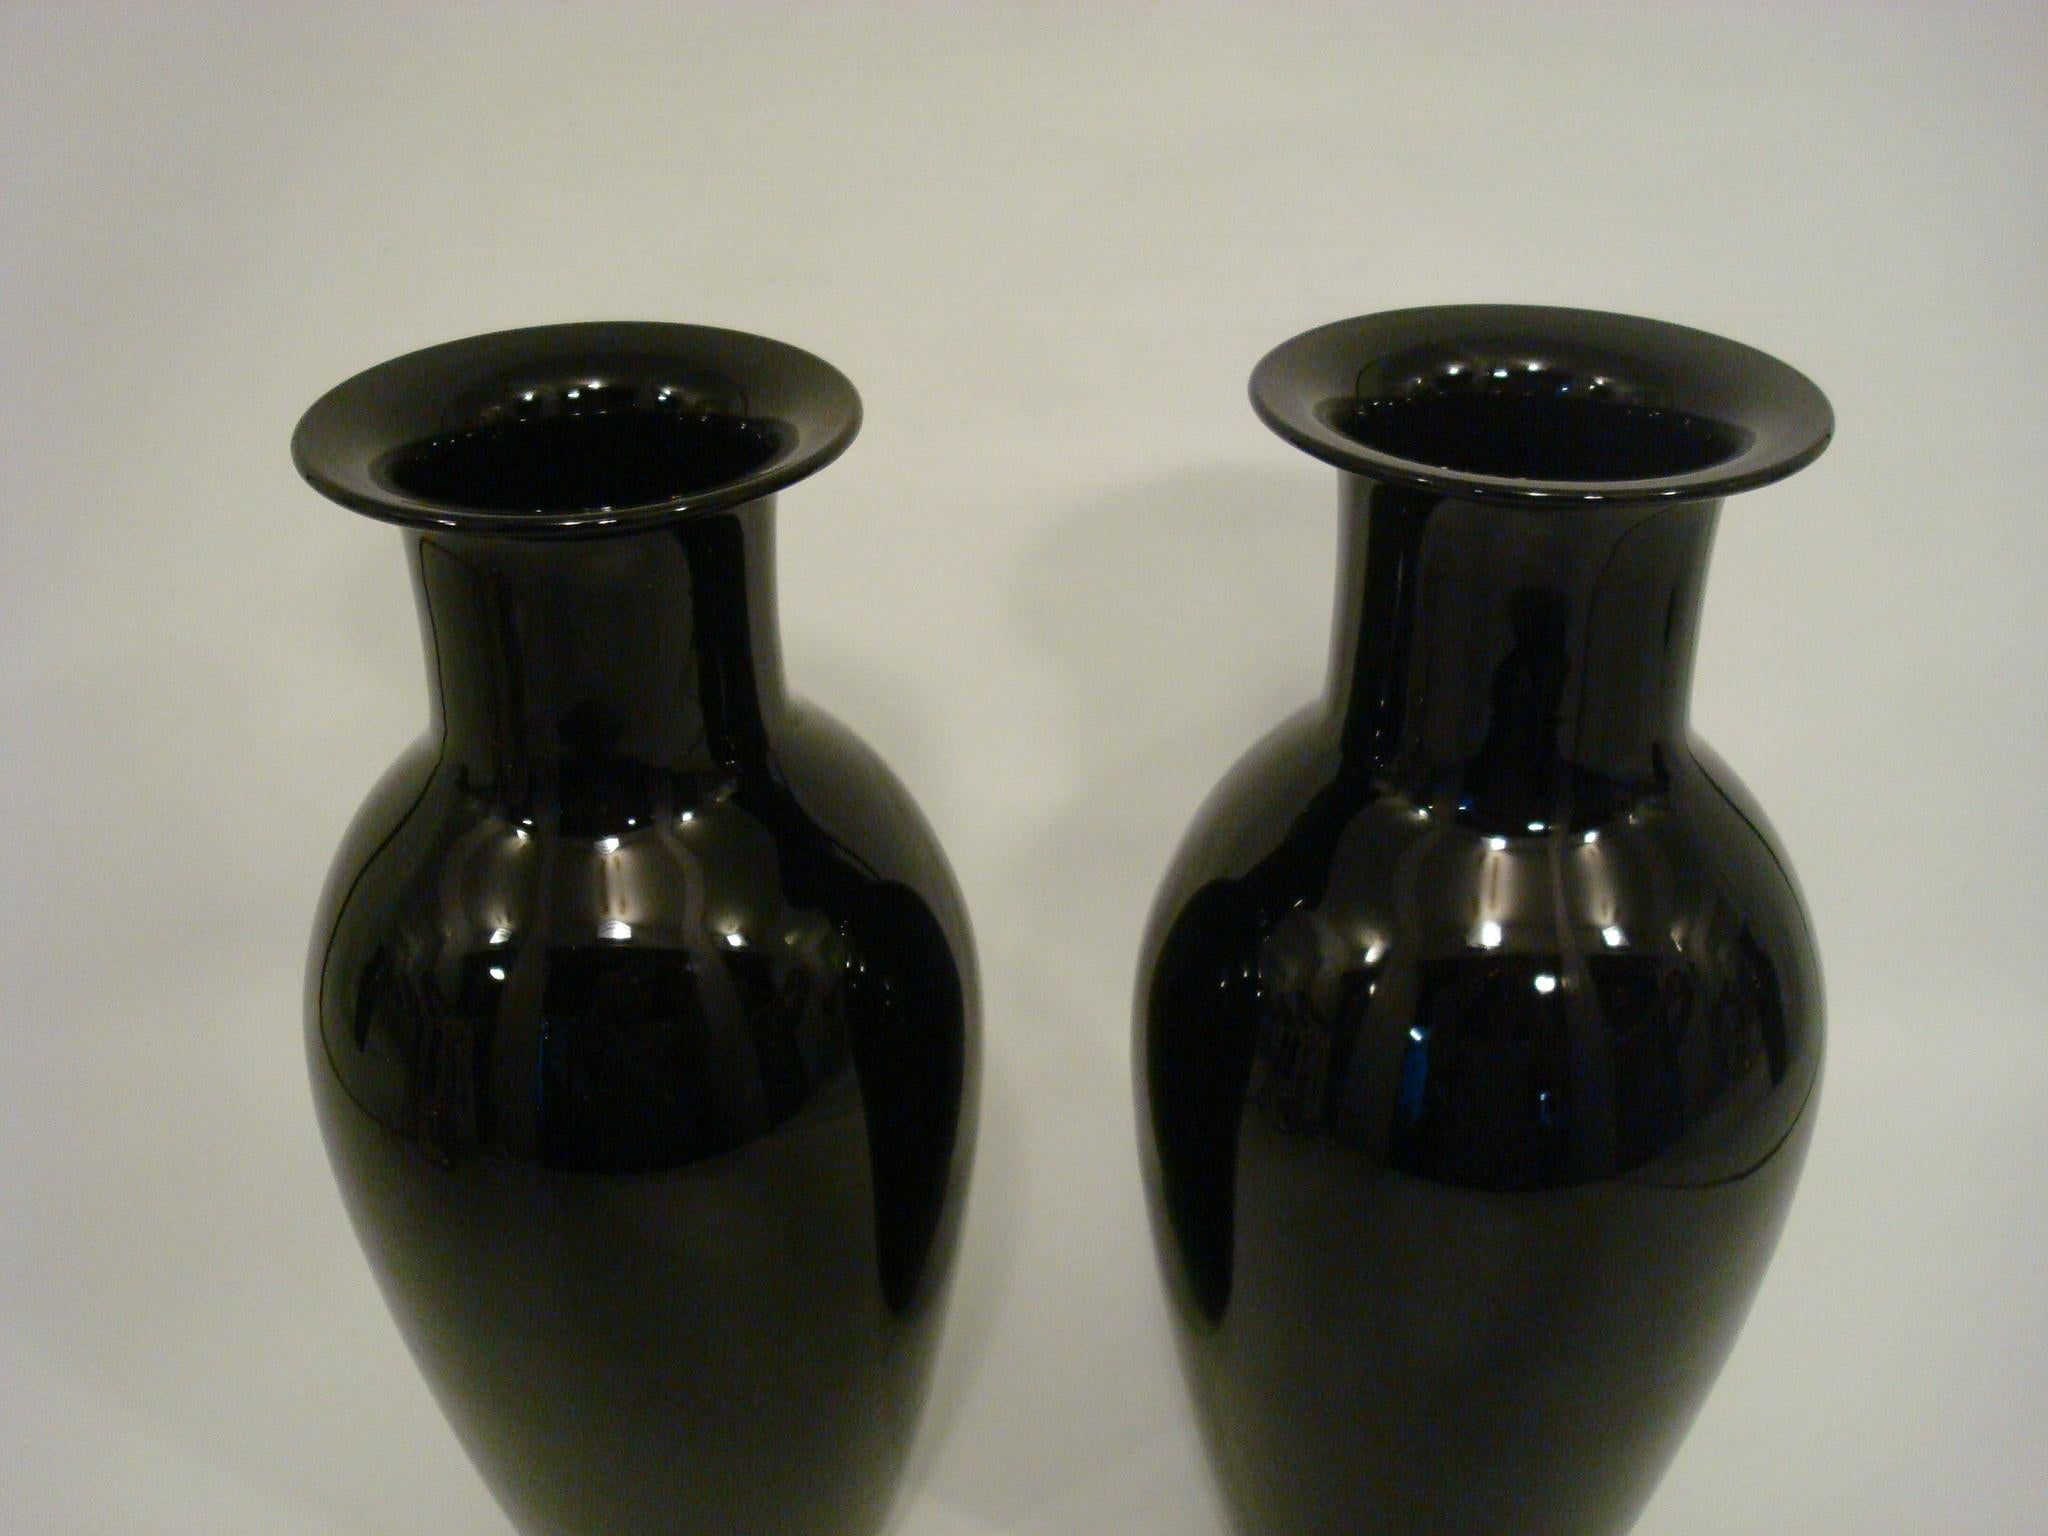 Pair of large black Murano vases by Barovier e Toso. Italy, 1970s.
Both are signed and have the original labels on them.
Hard to find as a pair.